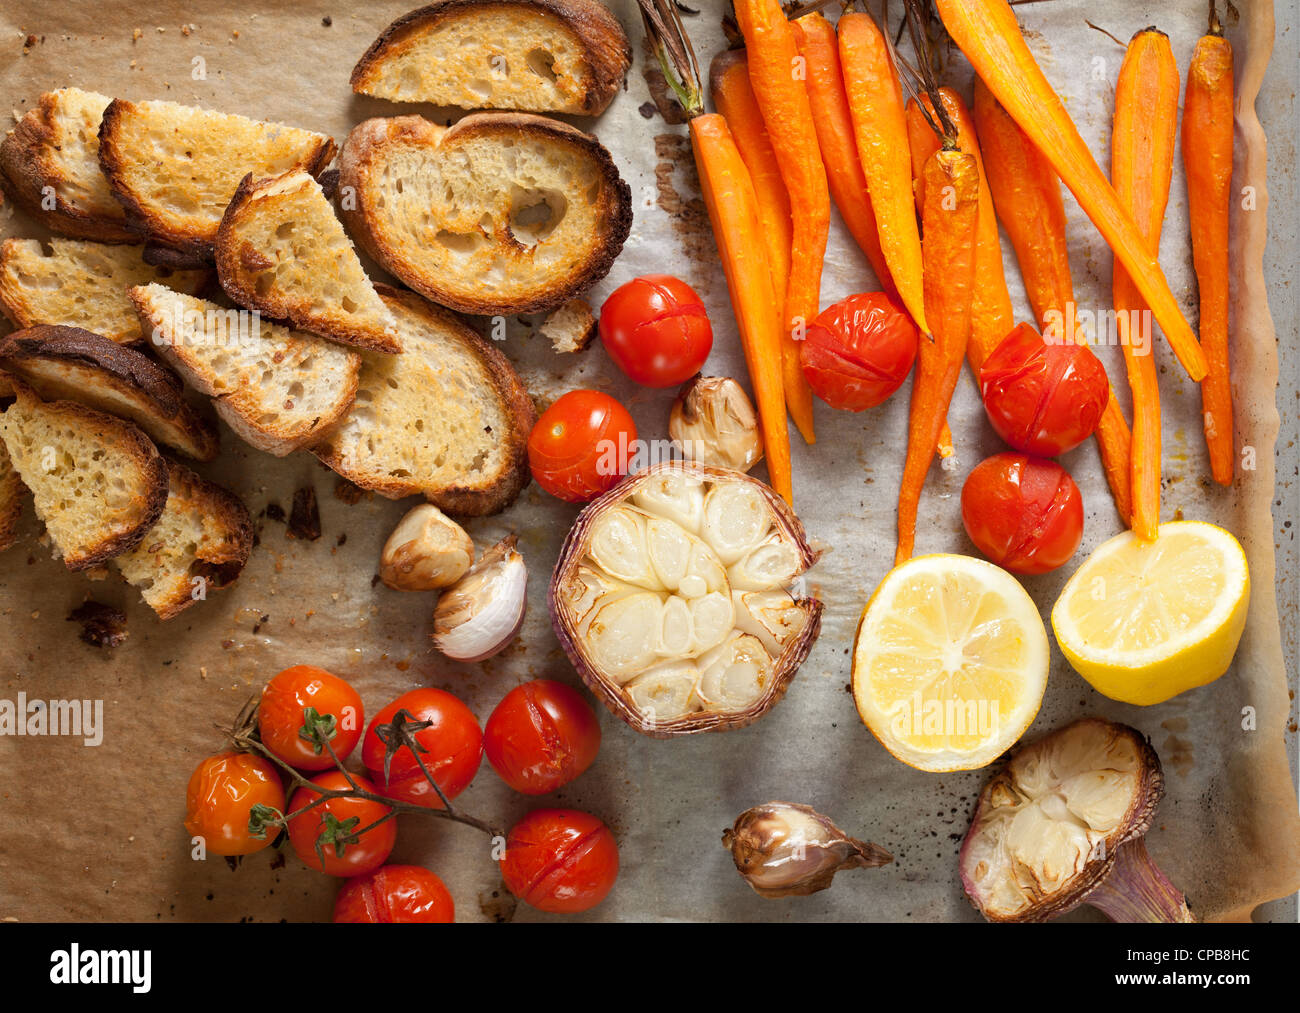 oven baked bread and vegetables withc garlic, lemon, tomatoes and carrots Stock Photo